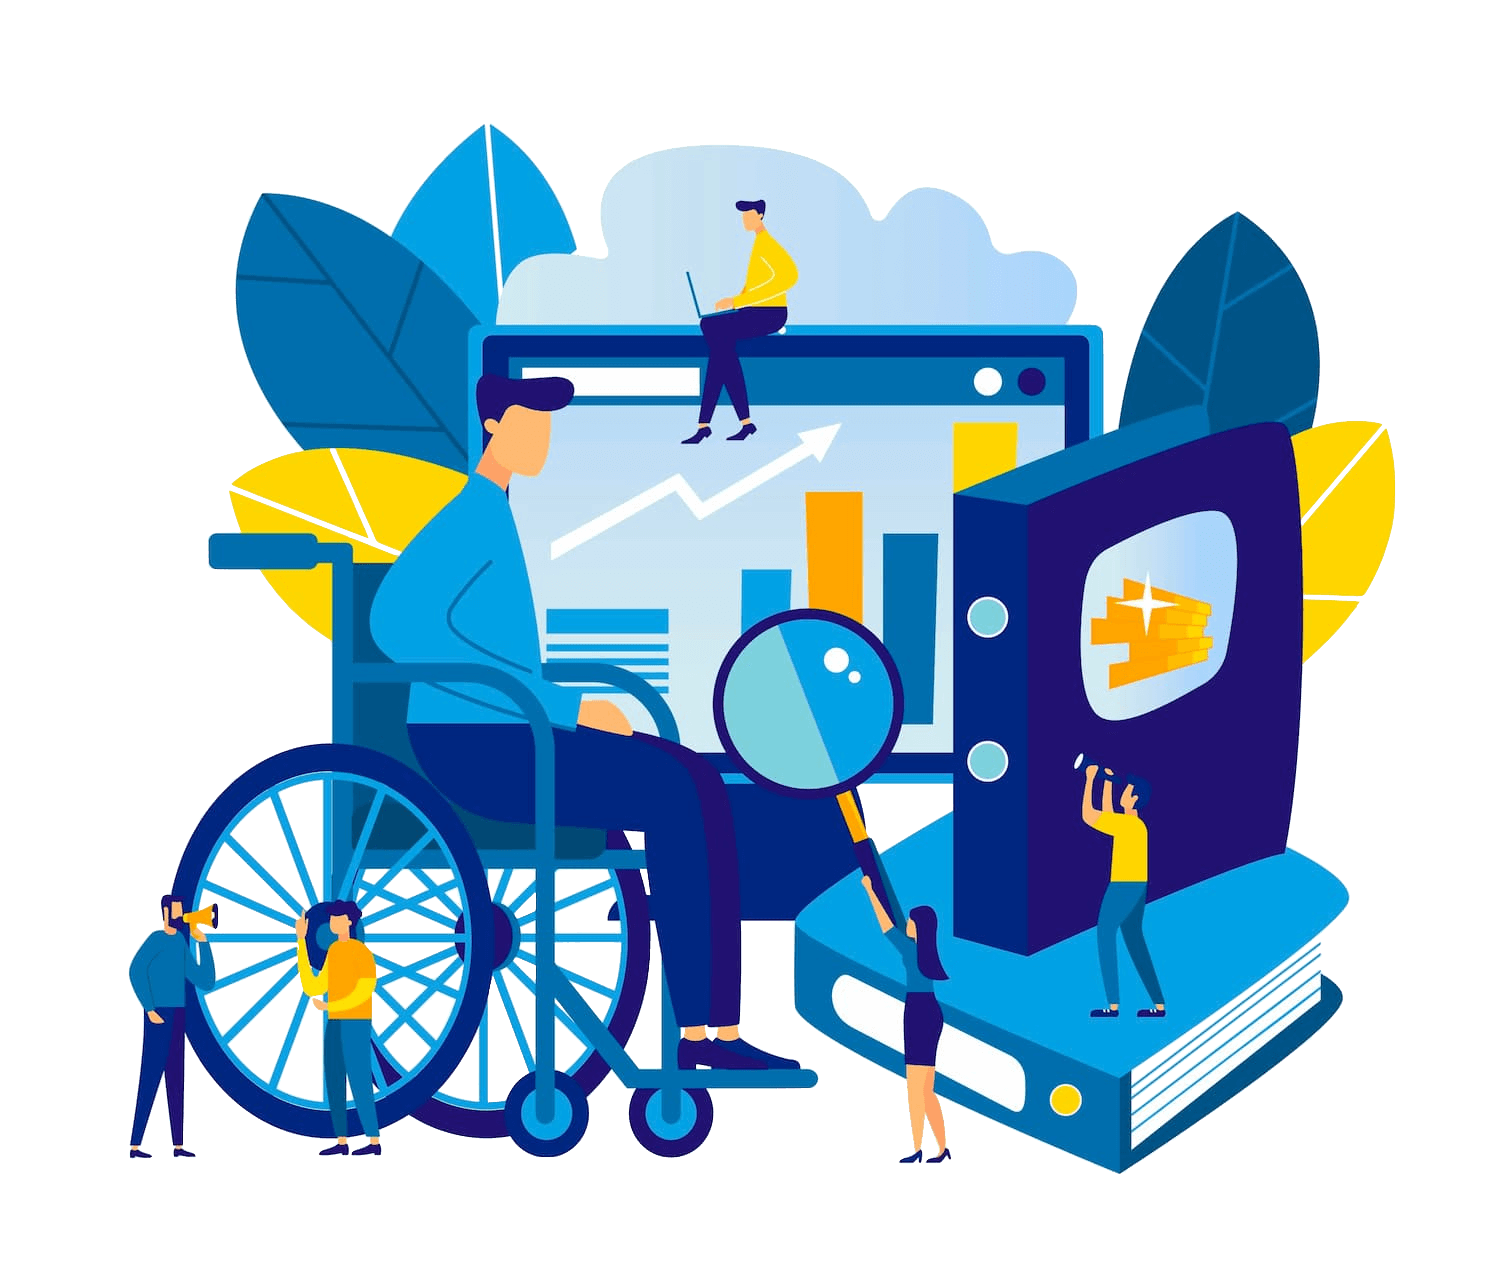 Web Accessibility - Blue Illustration showing a man on a wheelchair in front of a screen